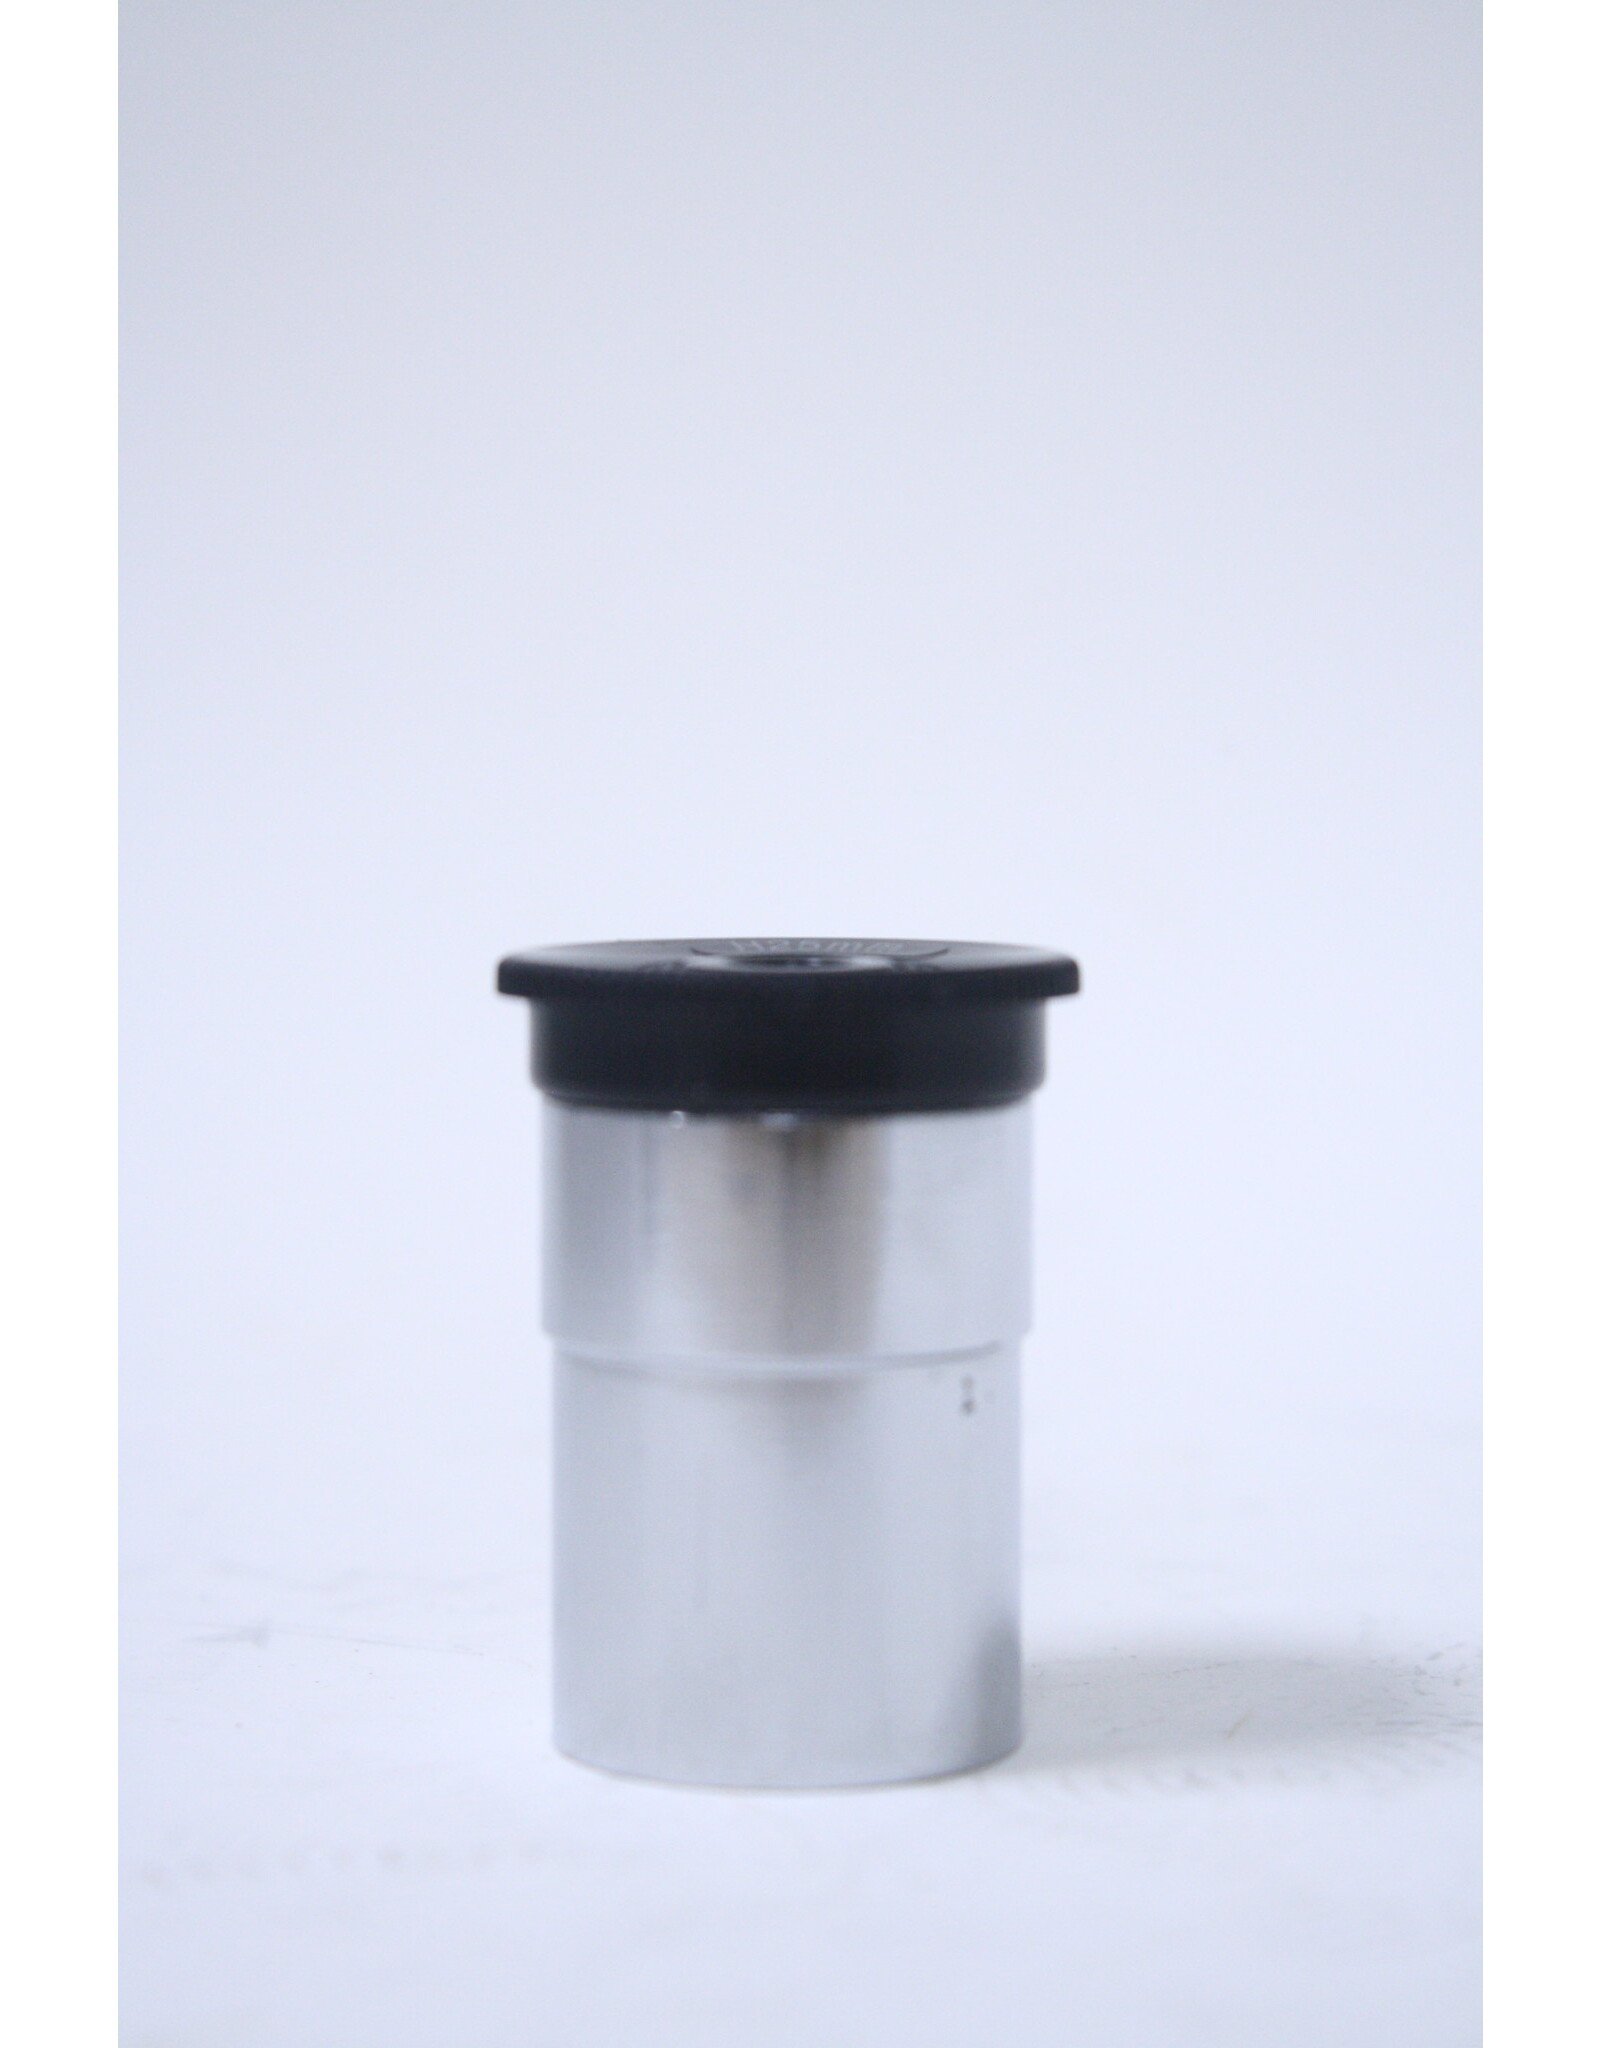 H25 25mm Eyepiece .965 Inch (Pre-owned)